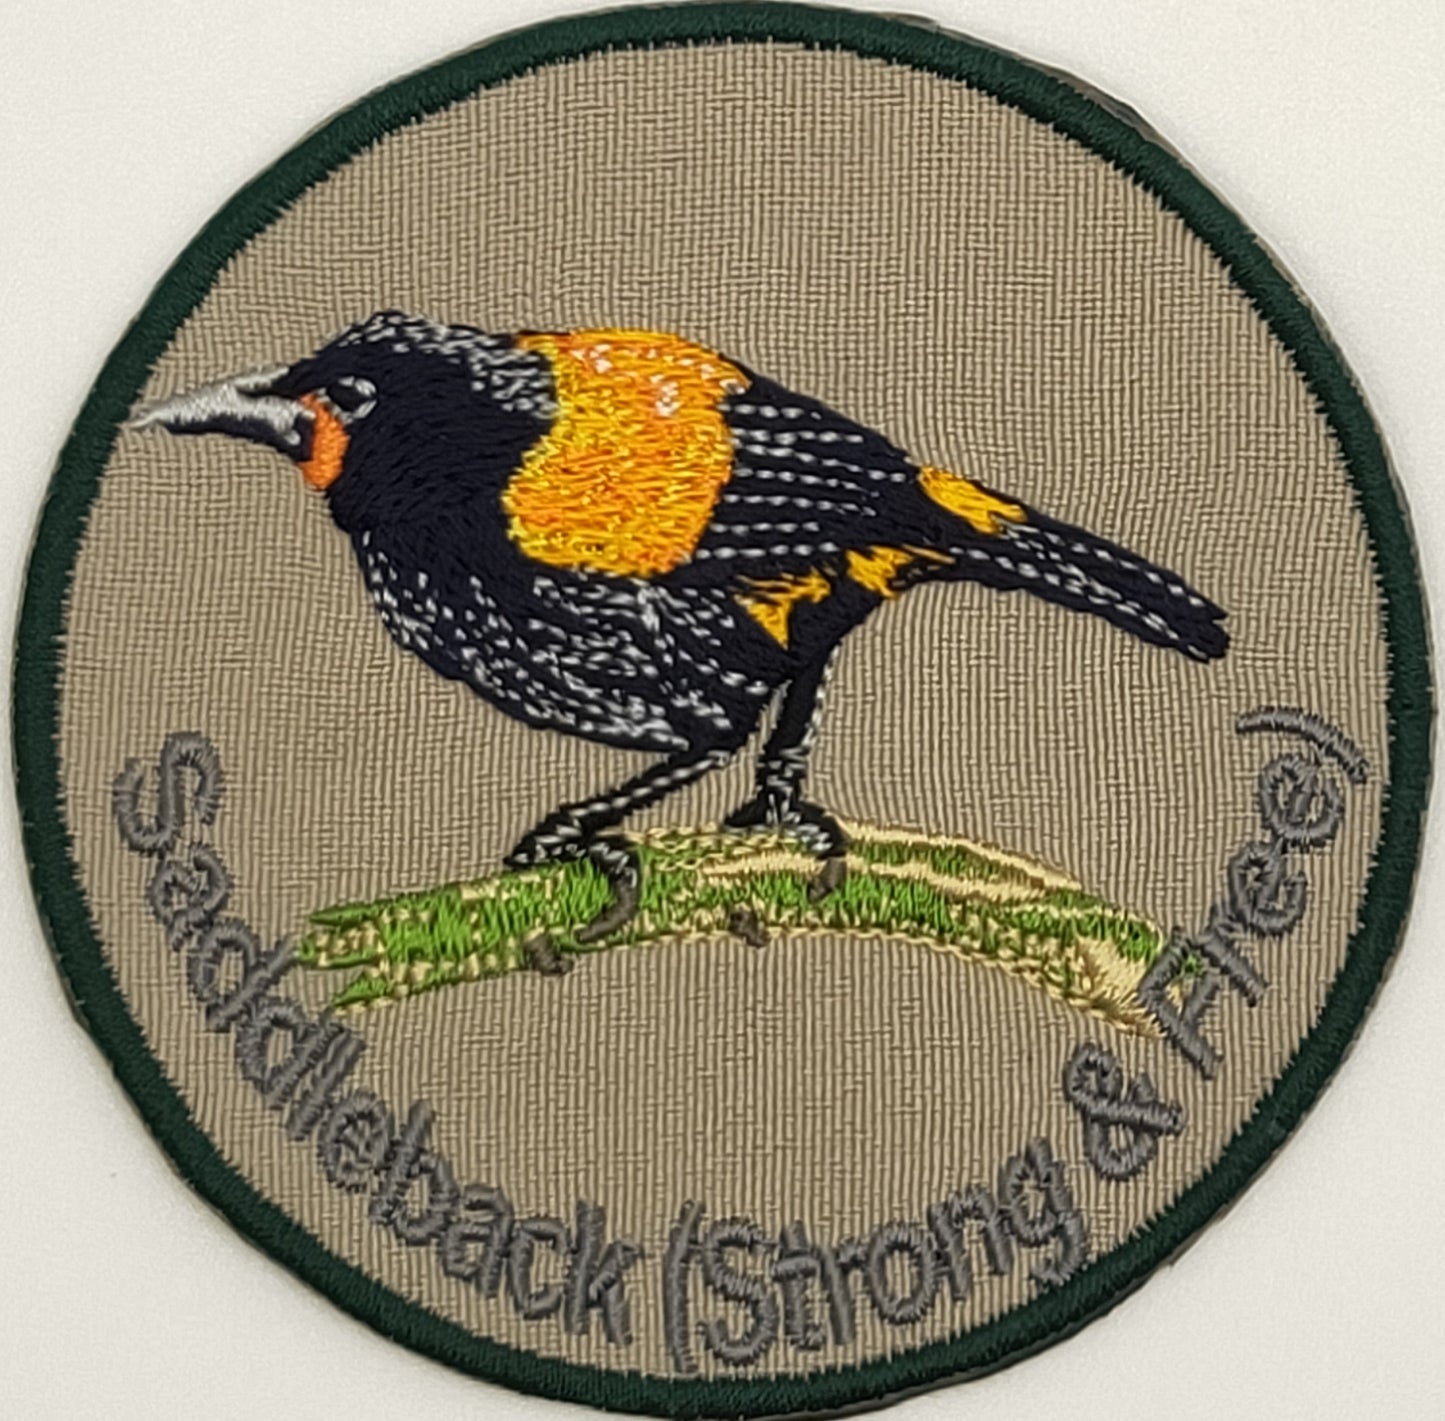 custom embroidered patches made in New Zealand NZ